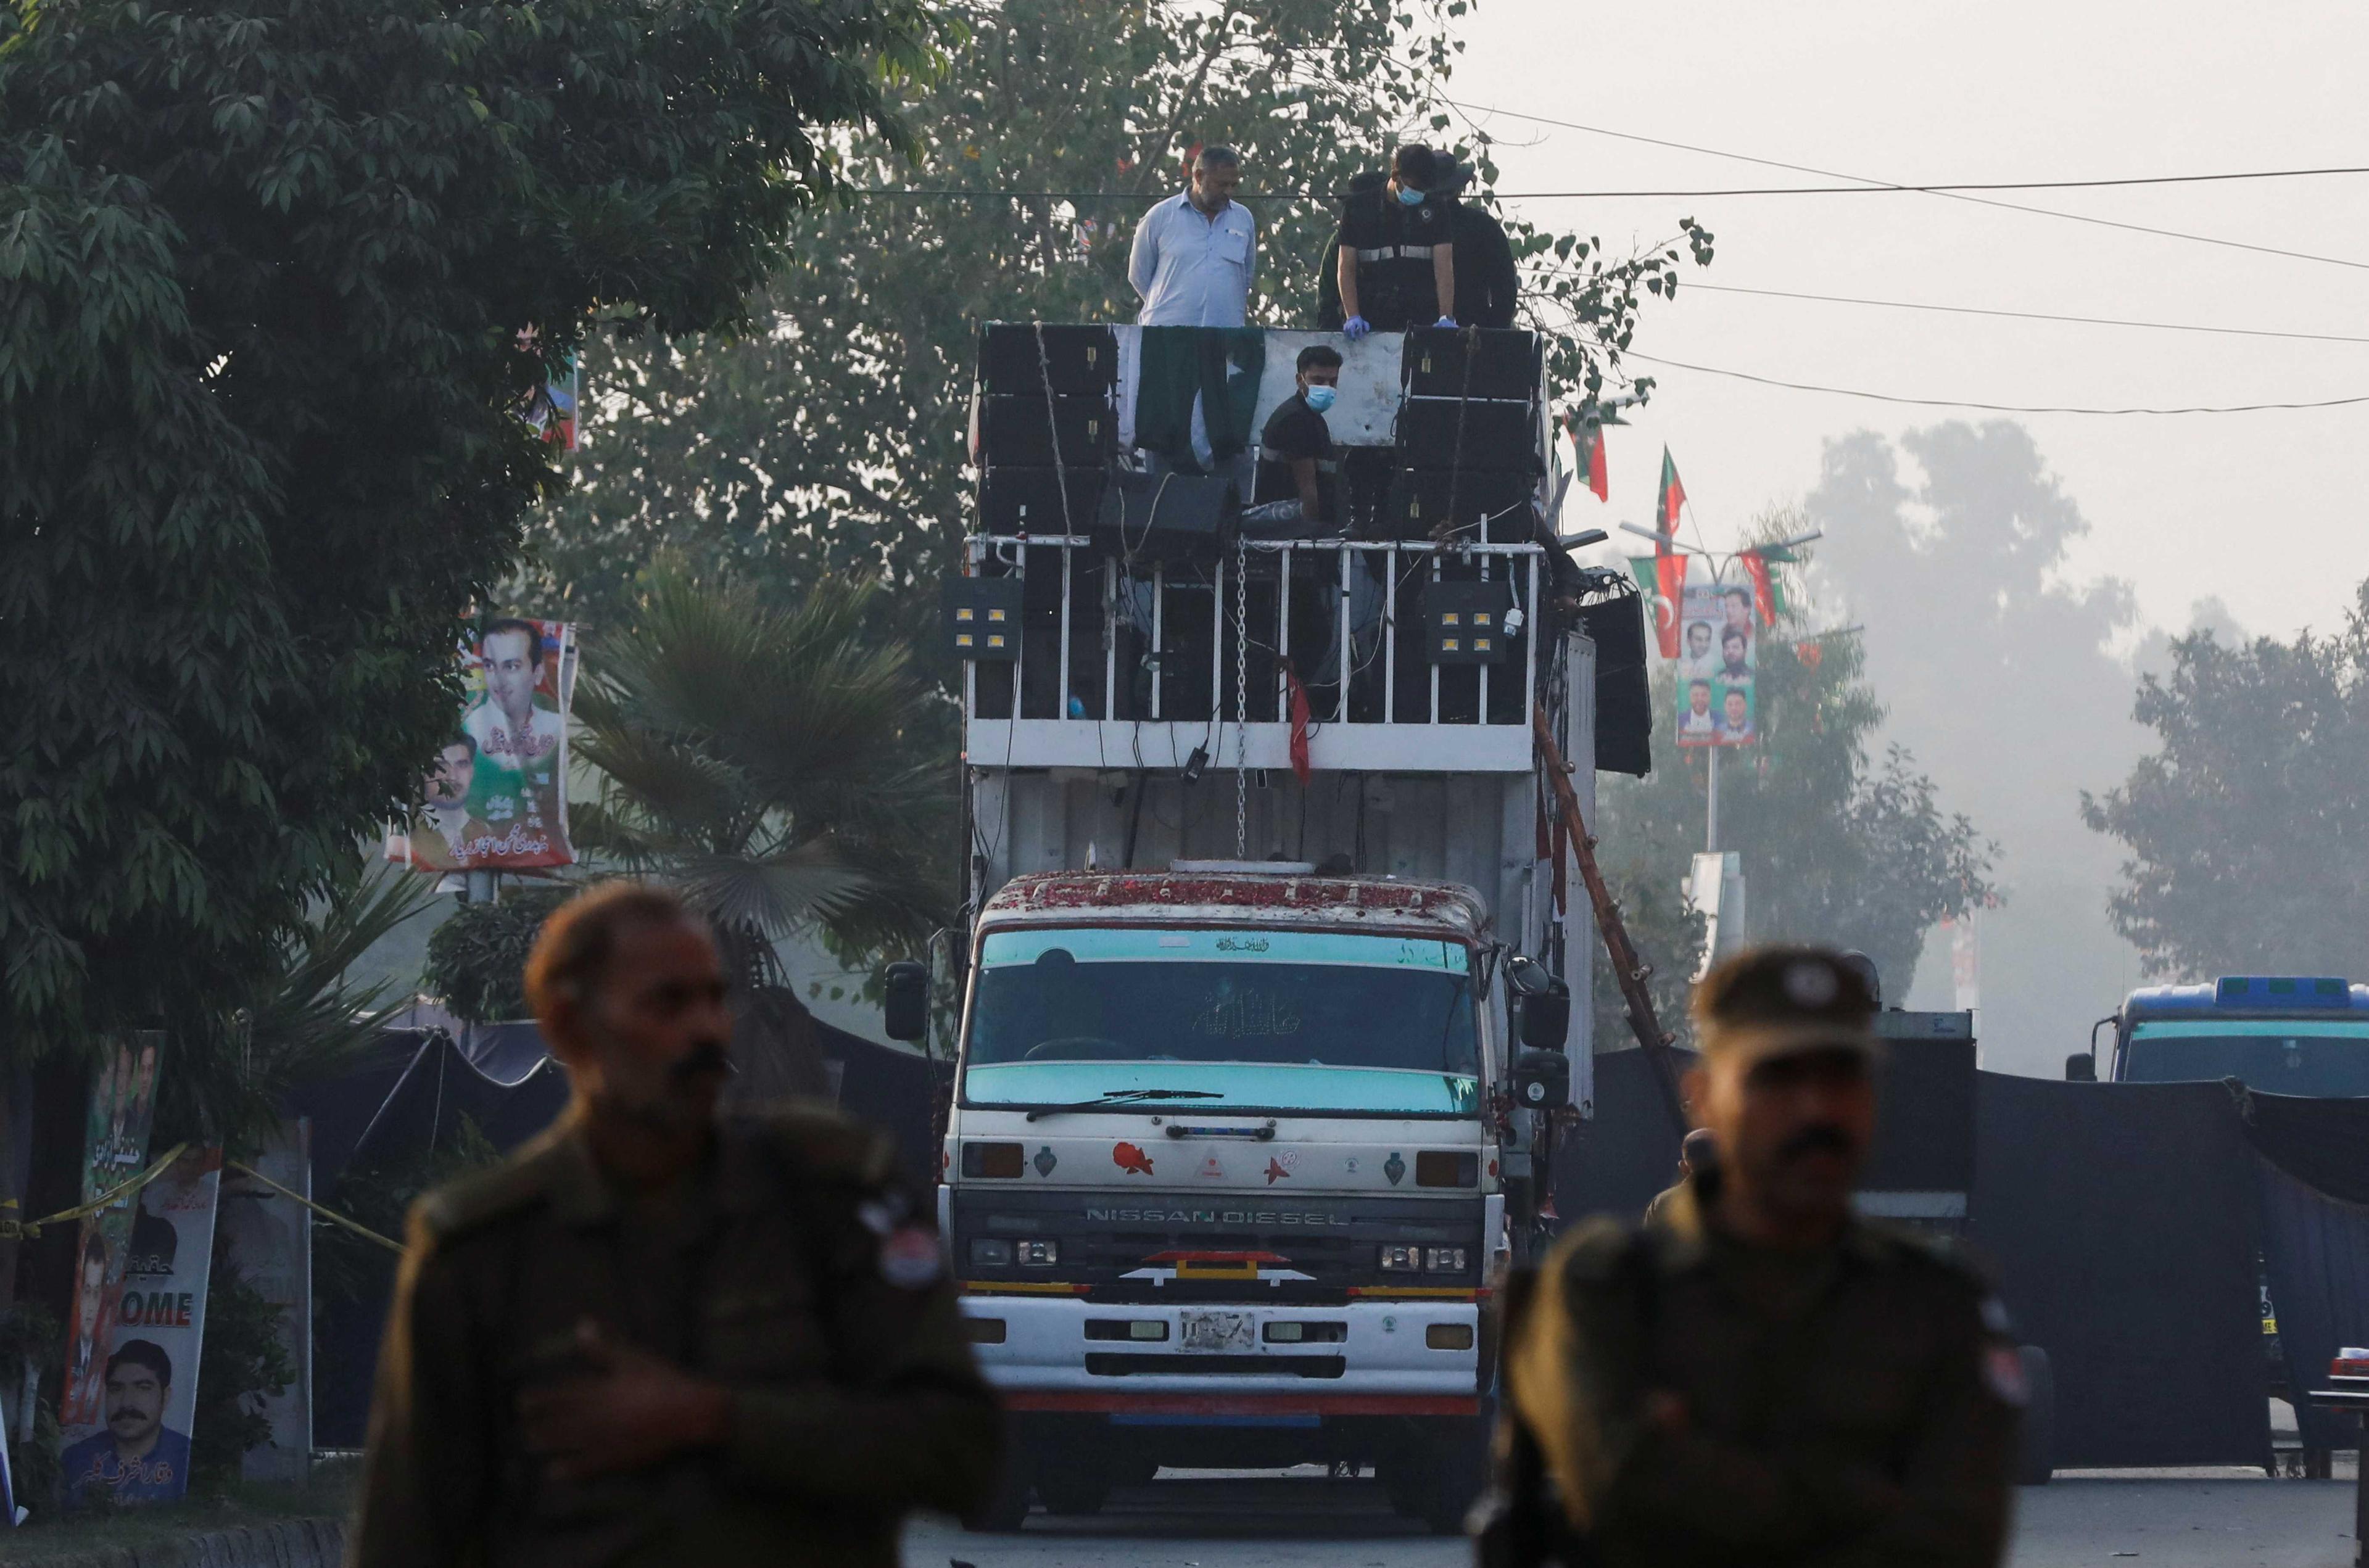 Police investigate the cordoned crime scene after a shooting incident on a long march held by Pakistan's former Prime Minister Imran Khan, in Wazirabad, Pakistan Nov 4. Photo: Reuters